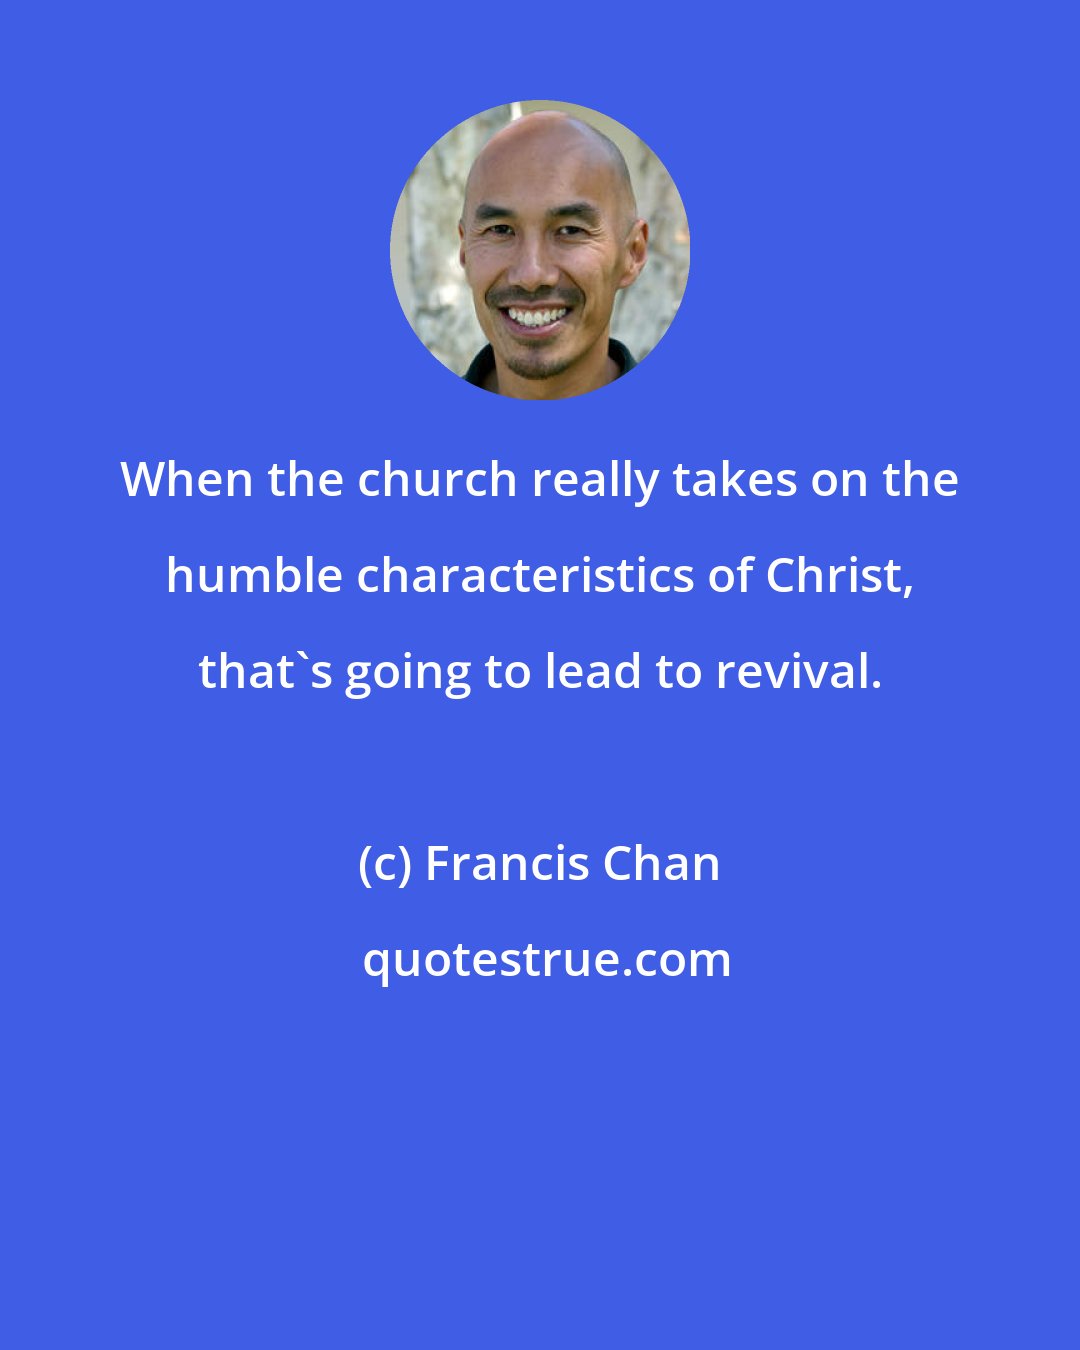 Francis Chan: When the church really takes on the humble characteristics of Christ, that's going to lead to revival.